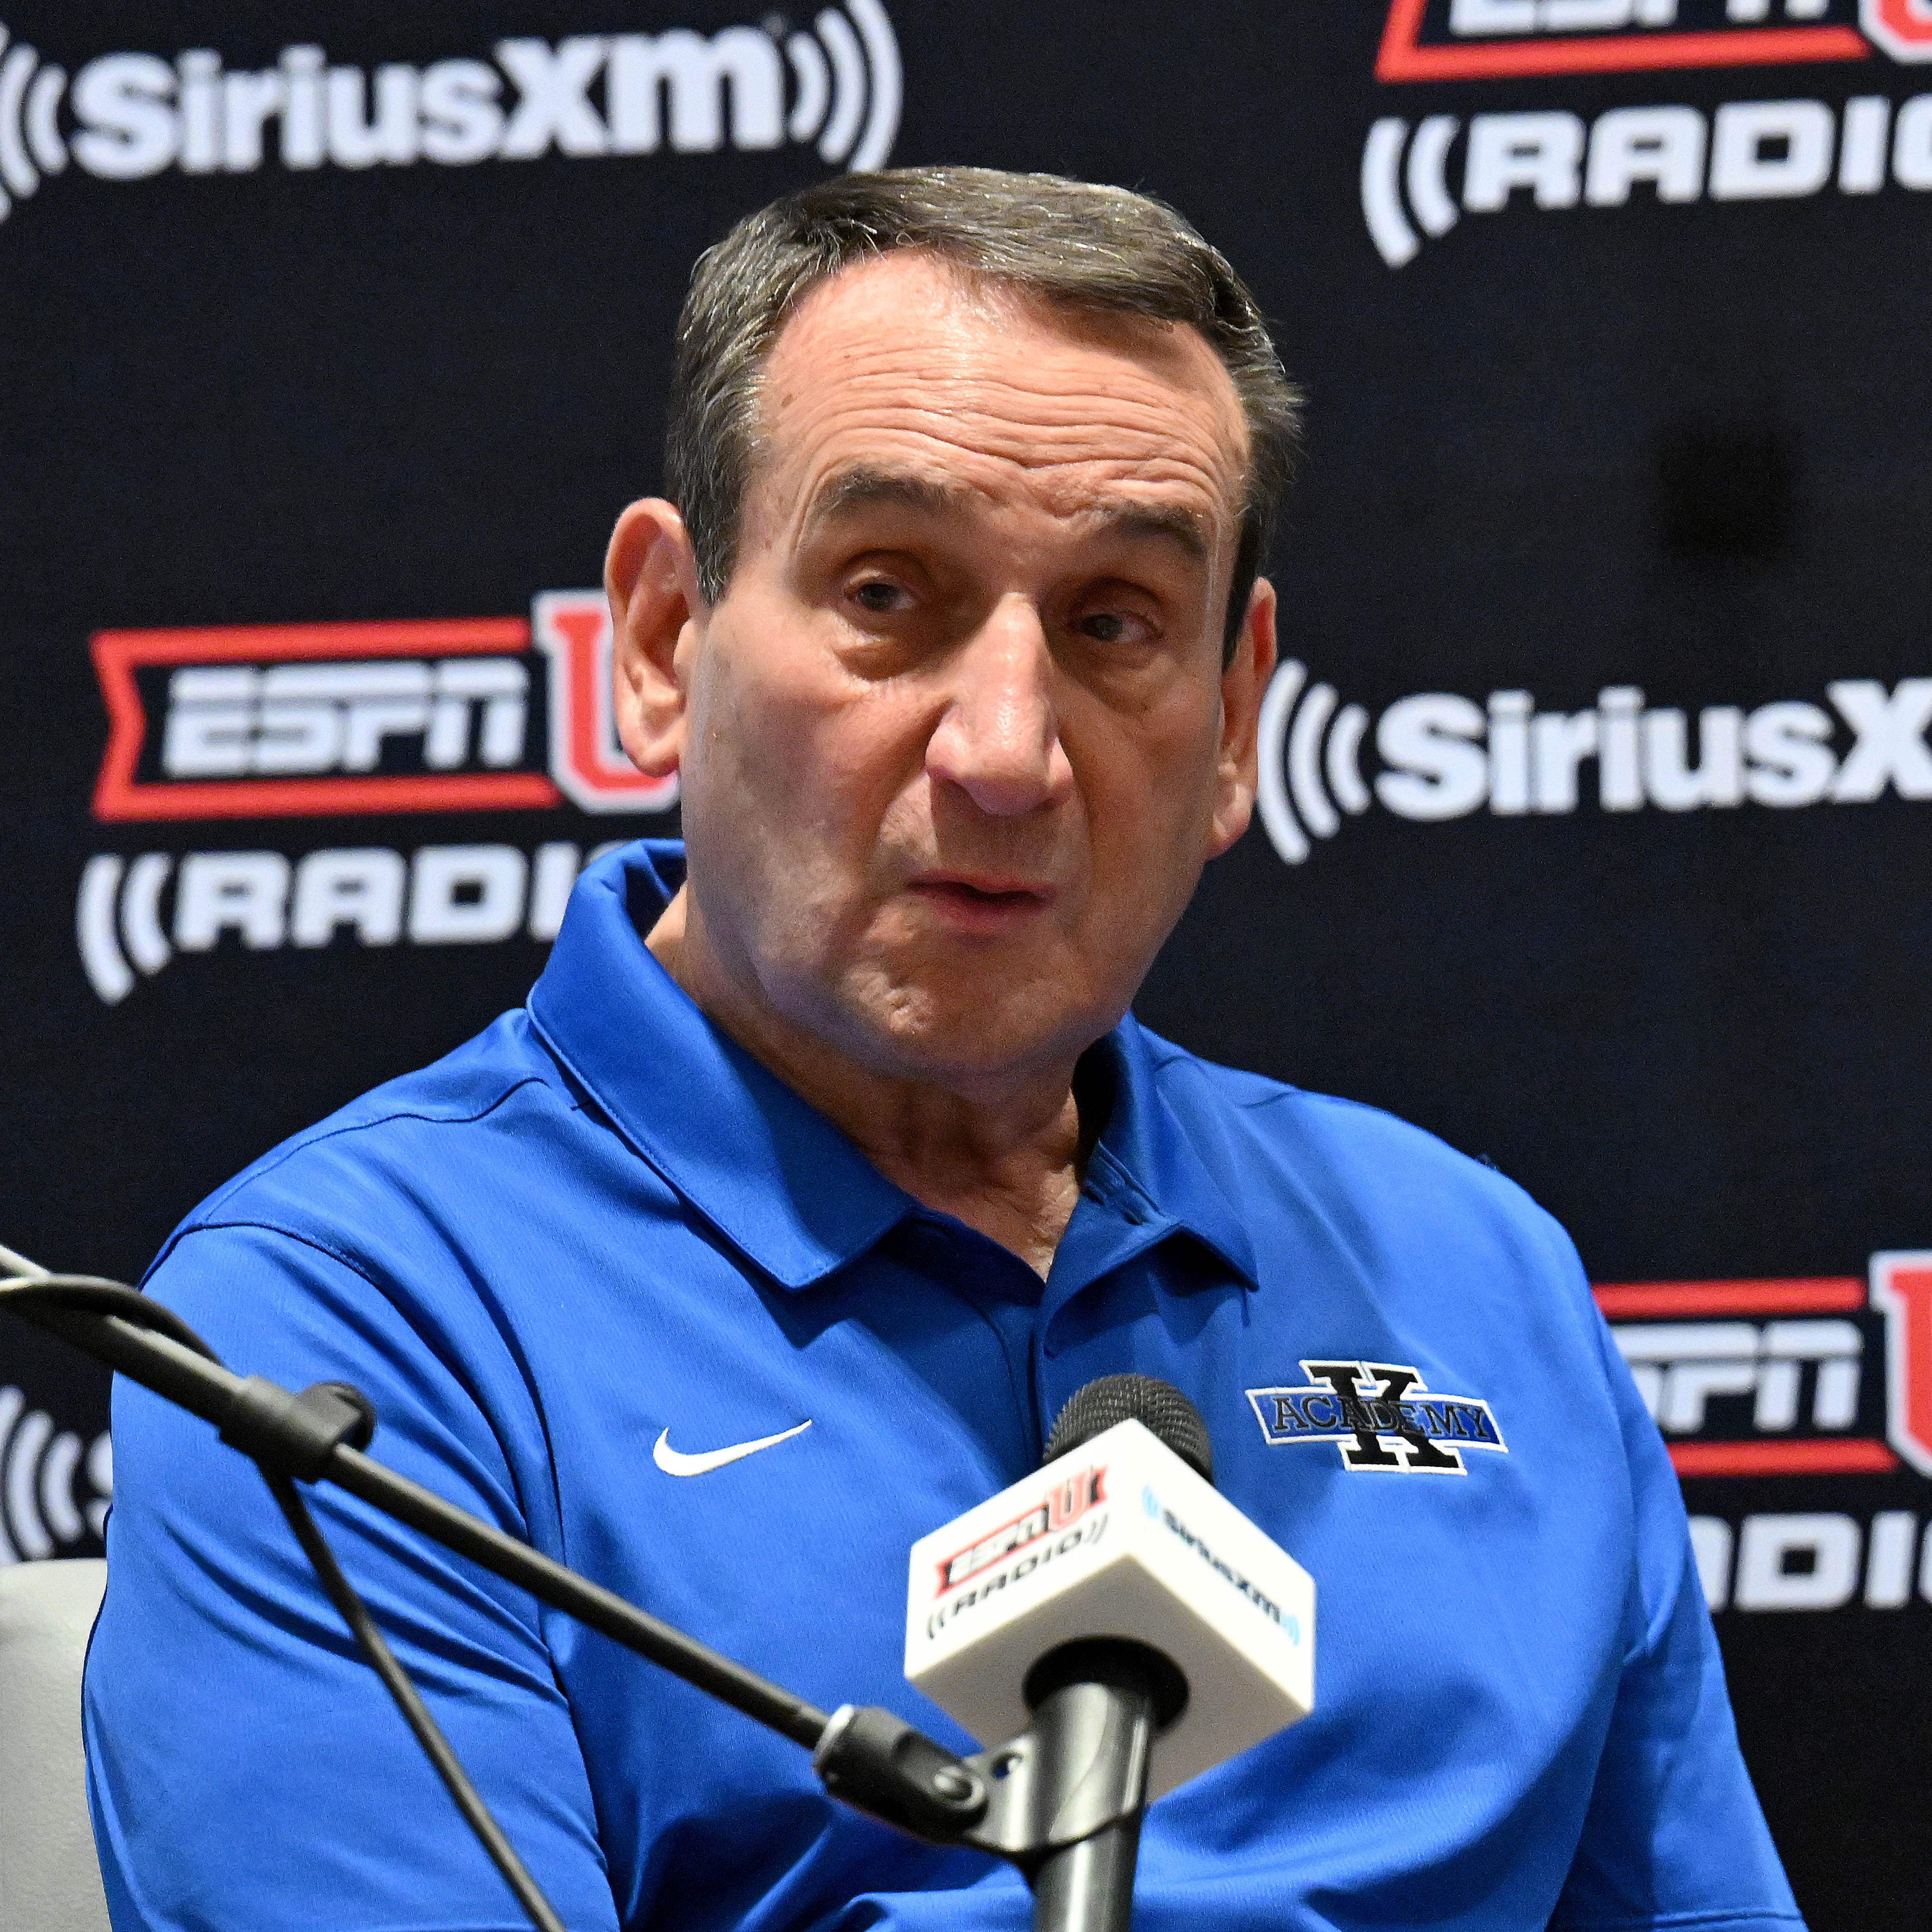 Mike Krzyzewski Says Politicians Should Be 'Ashamed' After Recent Mass Shootings